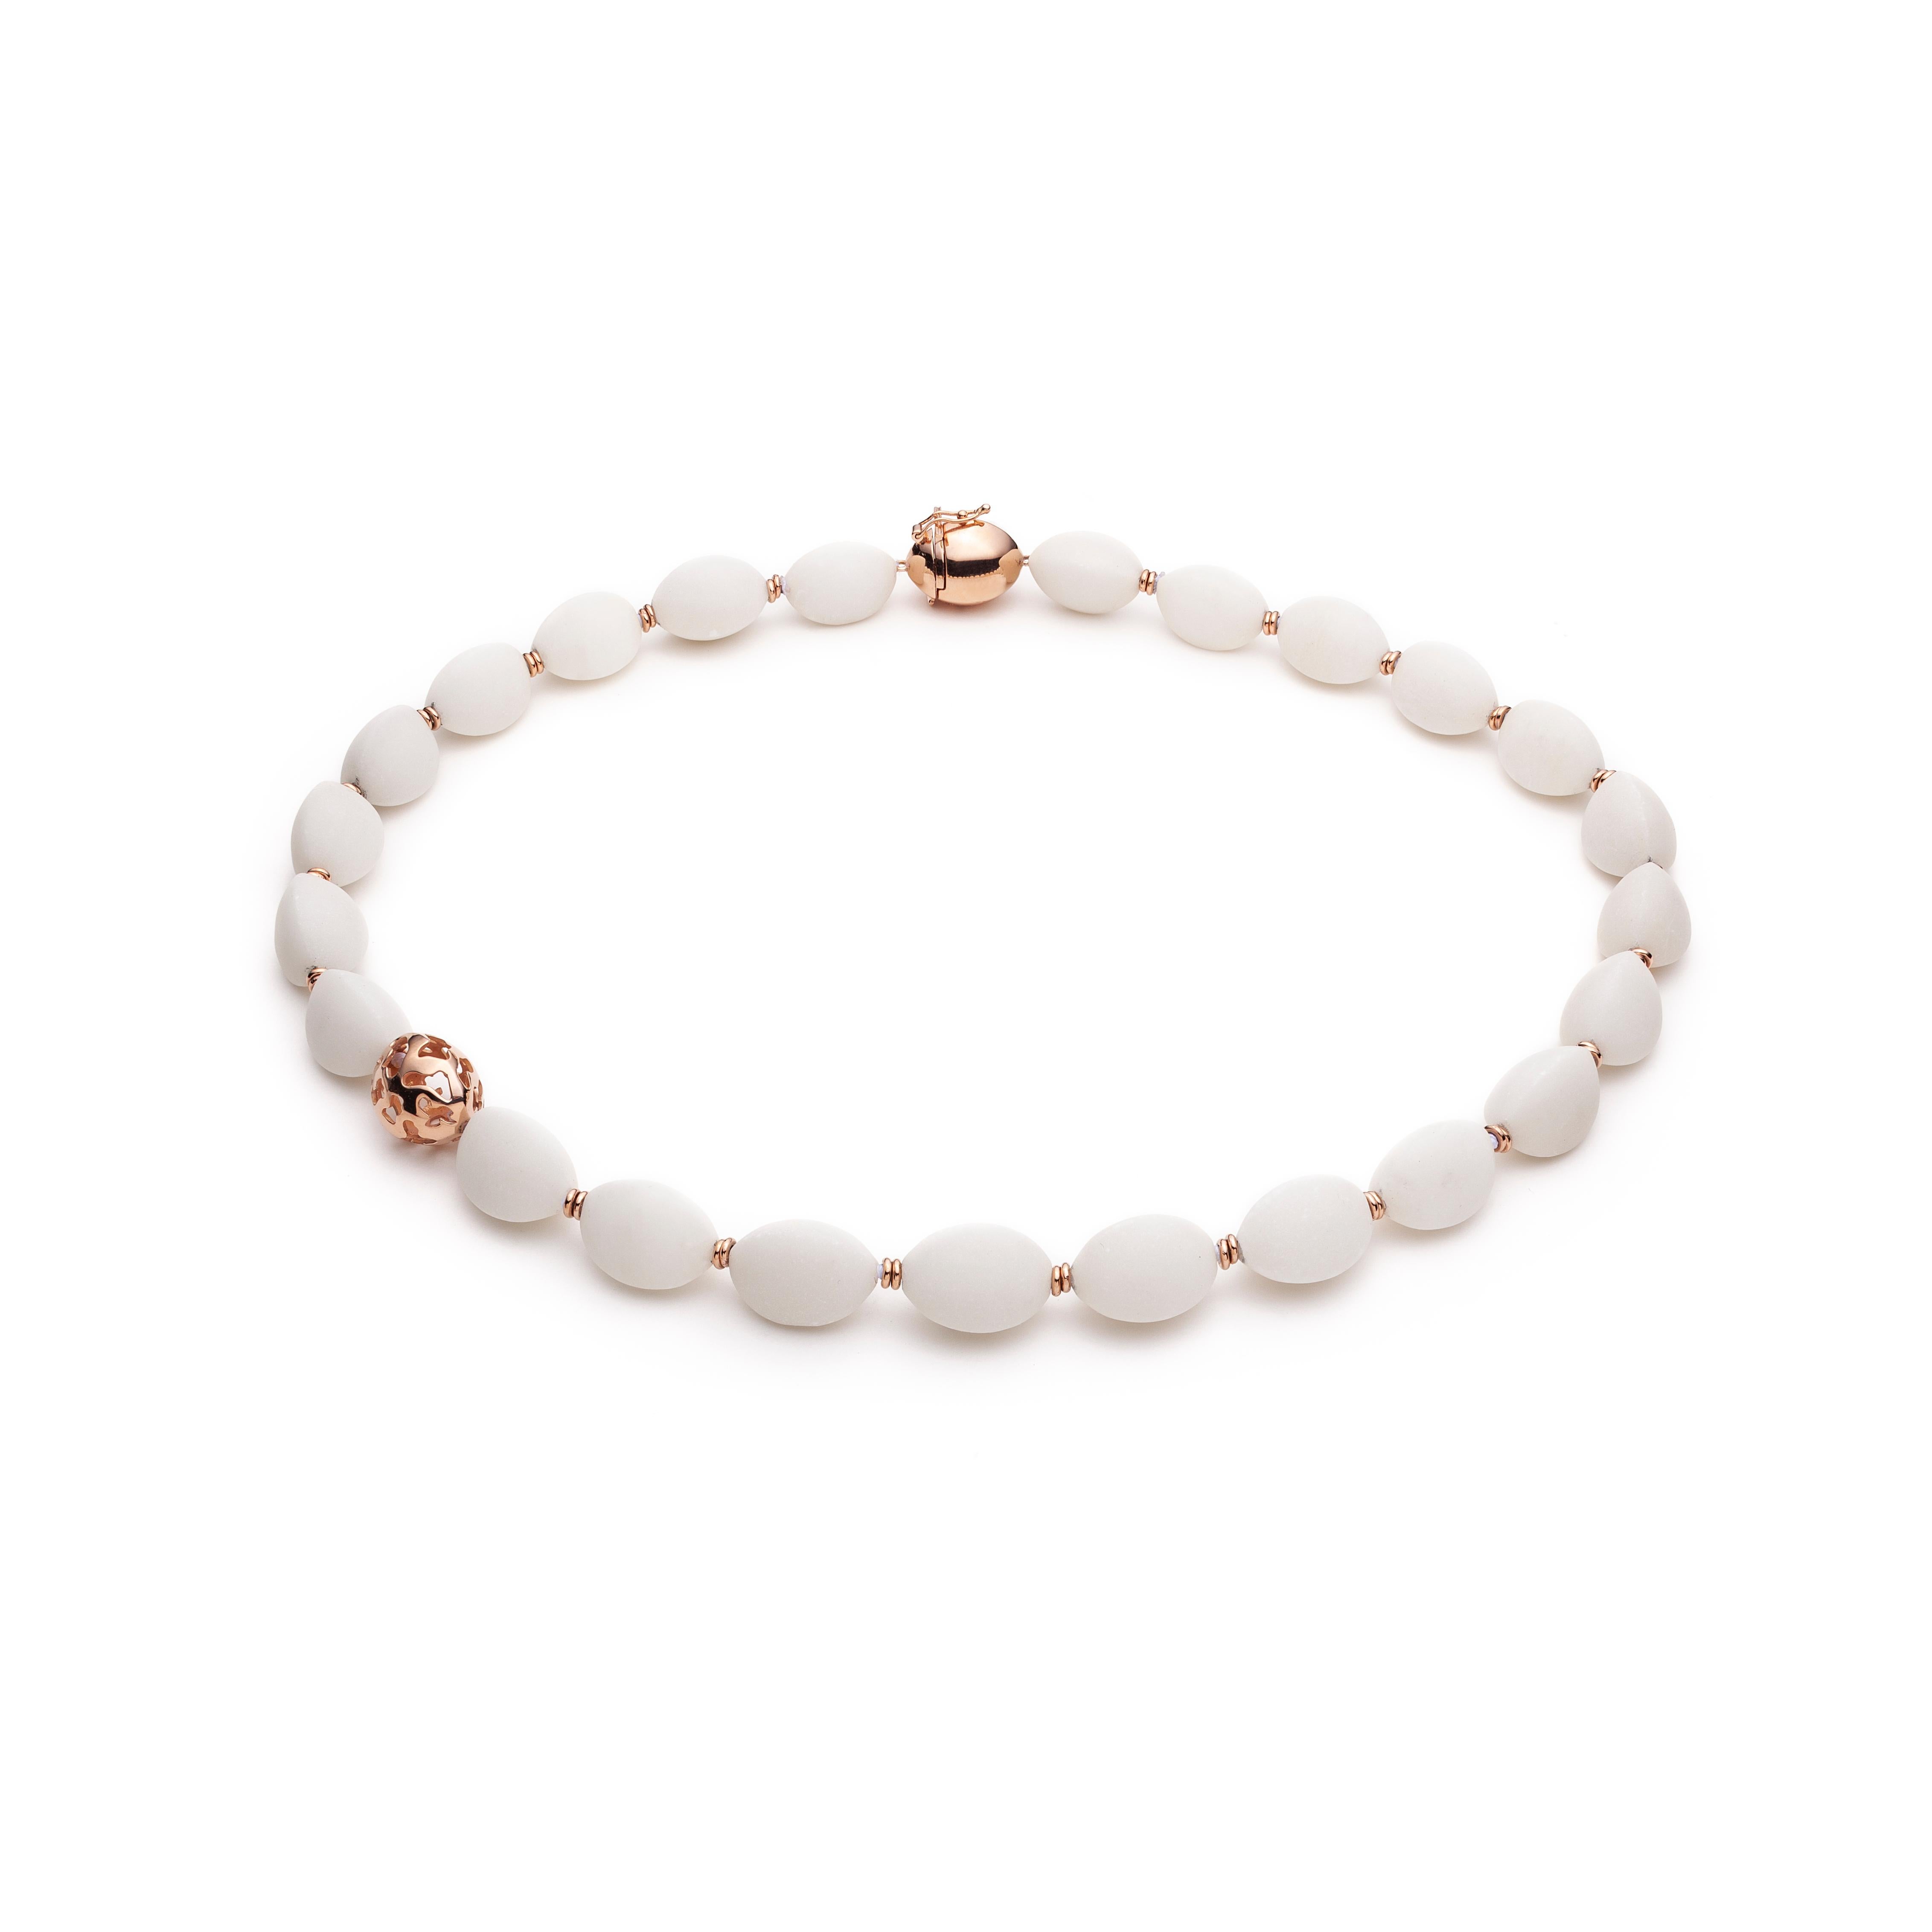 This unique, white calcite necklace is strung on silk and knotted for extra security, it adapts perfectly to the shape of your neck. Tiny gold elements hide the security knots. The 18k pink gold bead and the custom-made clasp, both replicate the